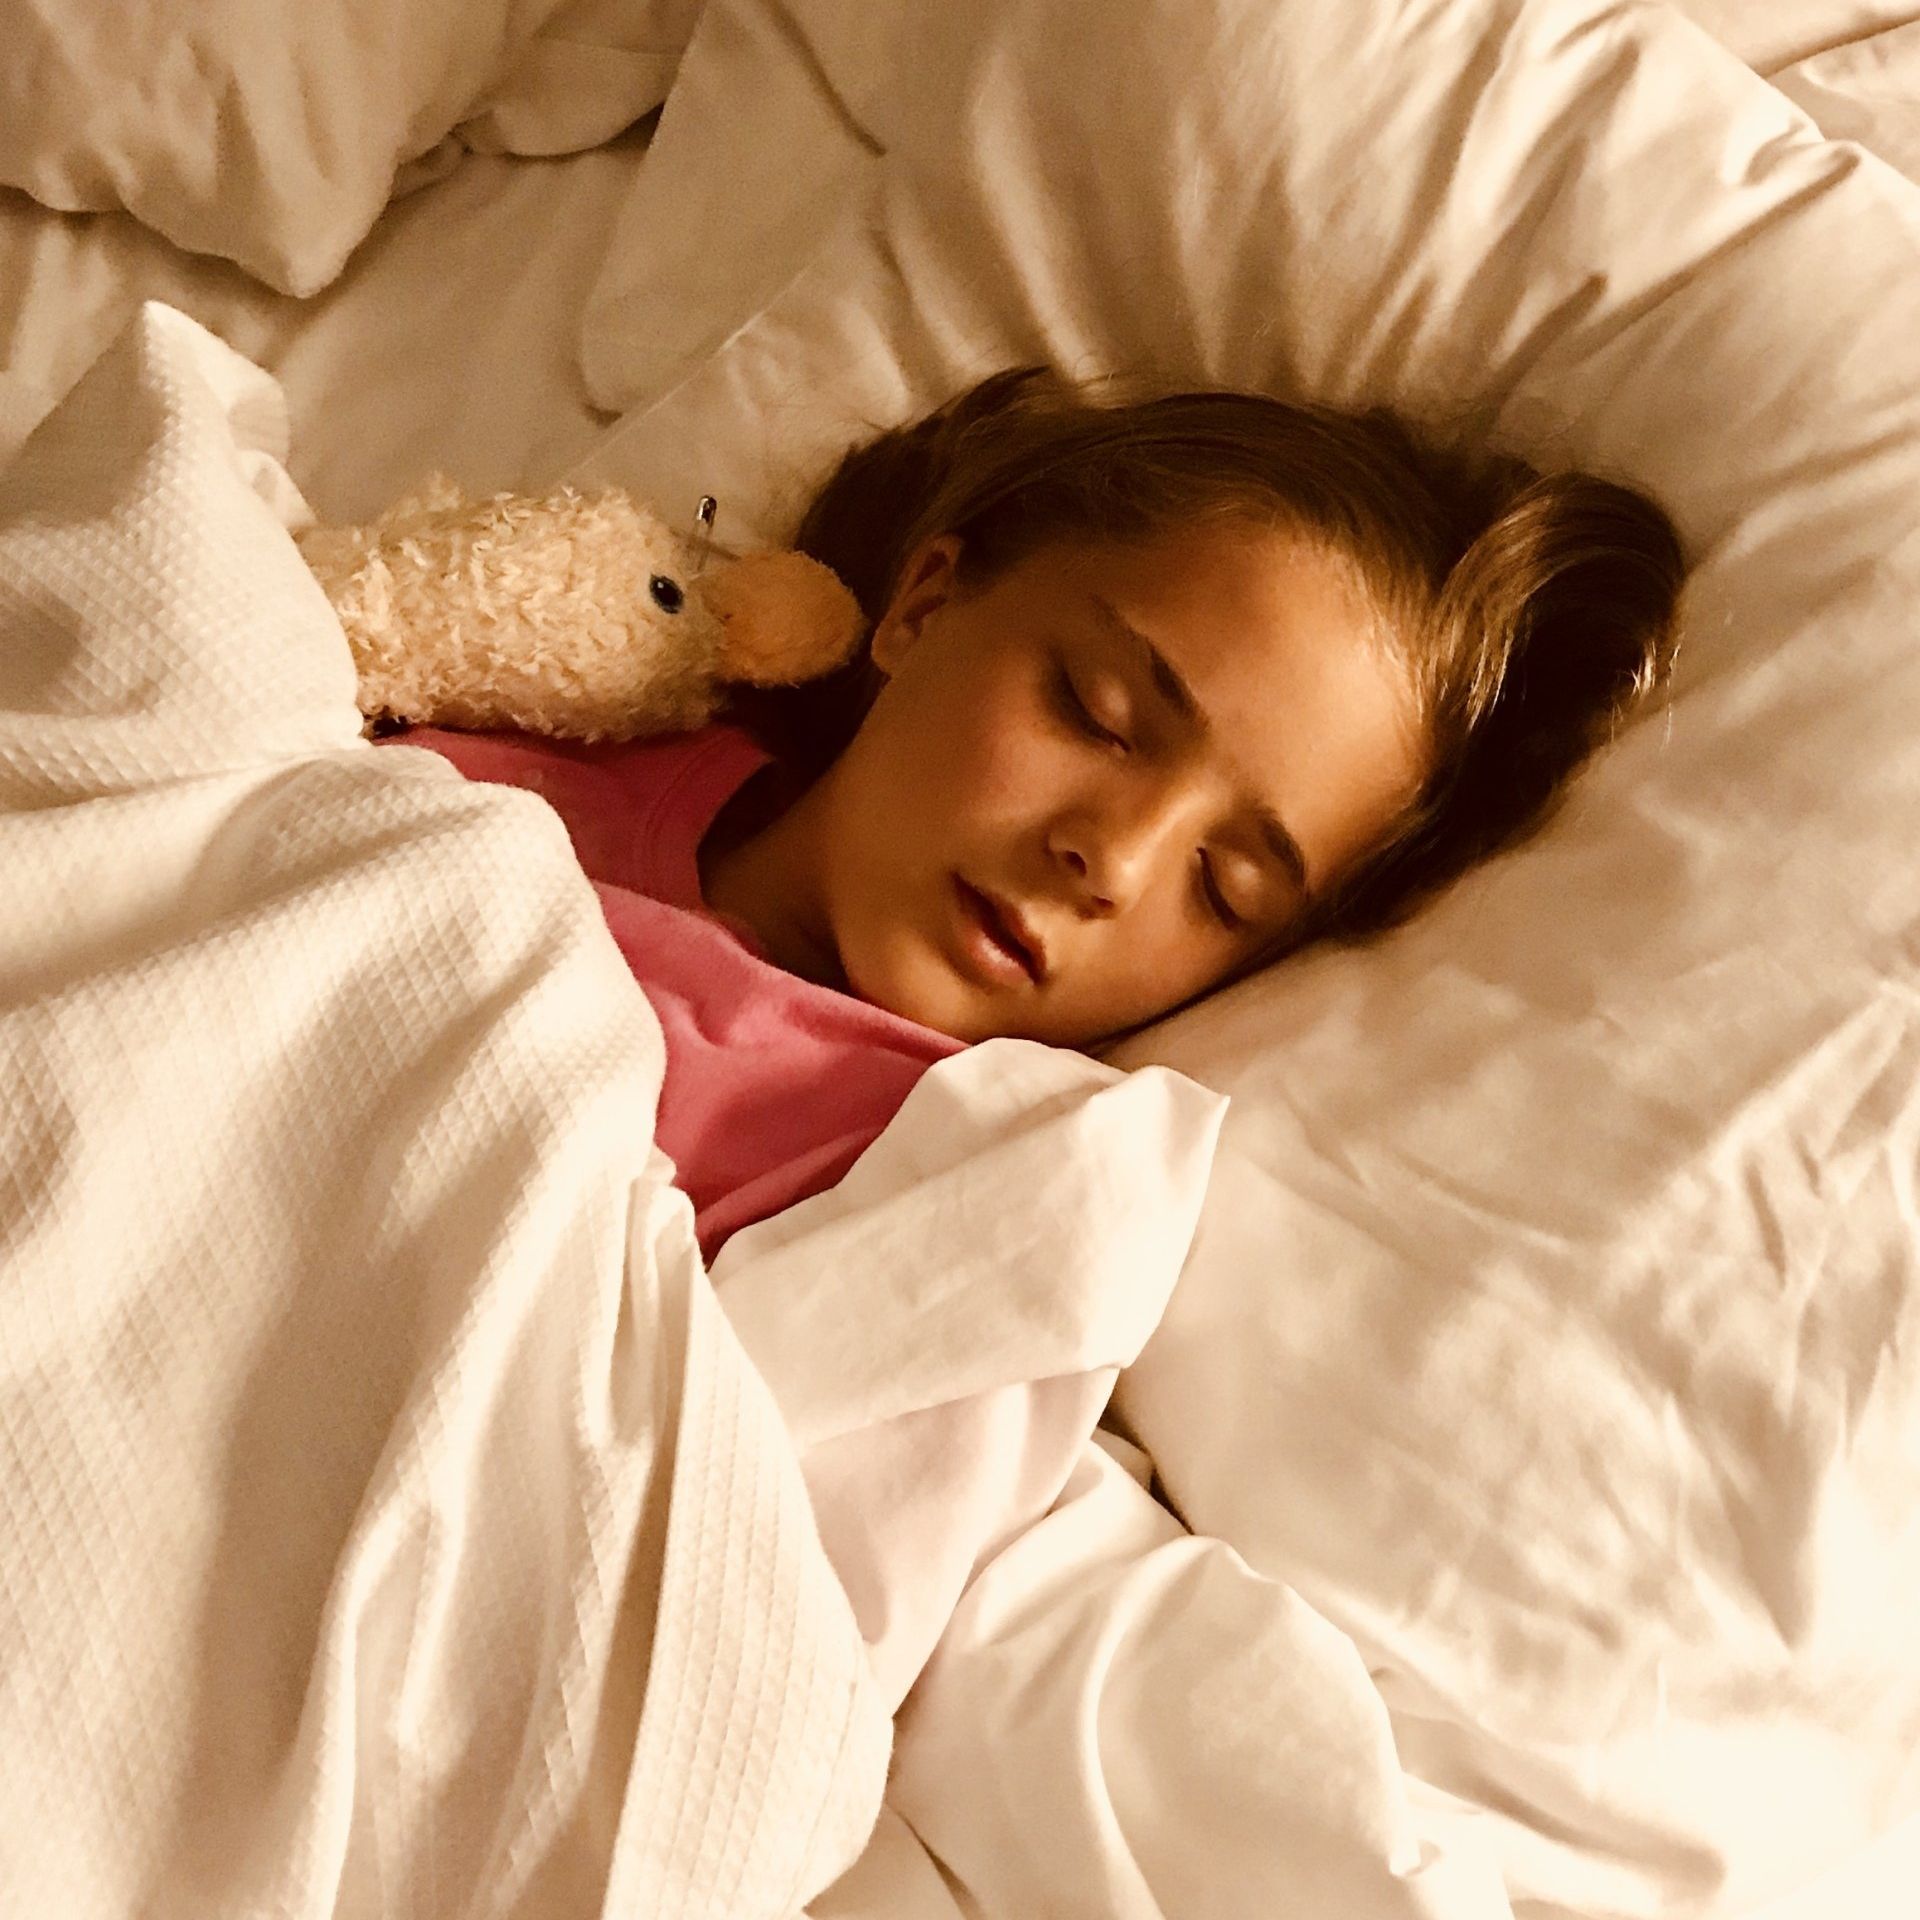 Image of child sleeping in bed.